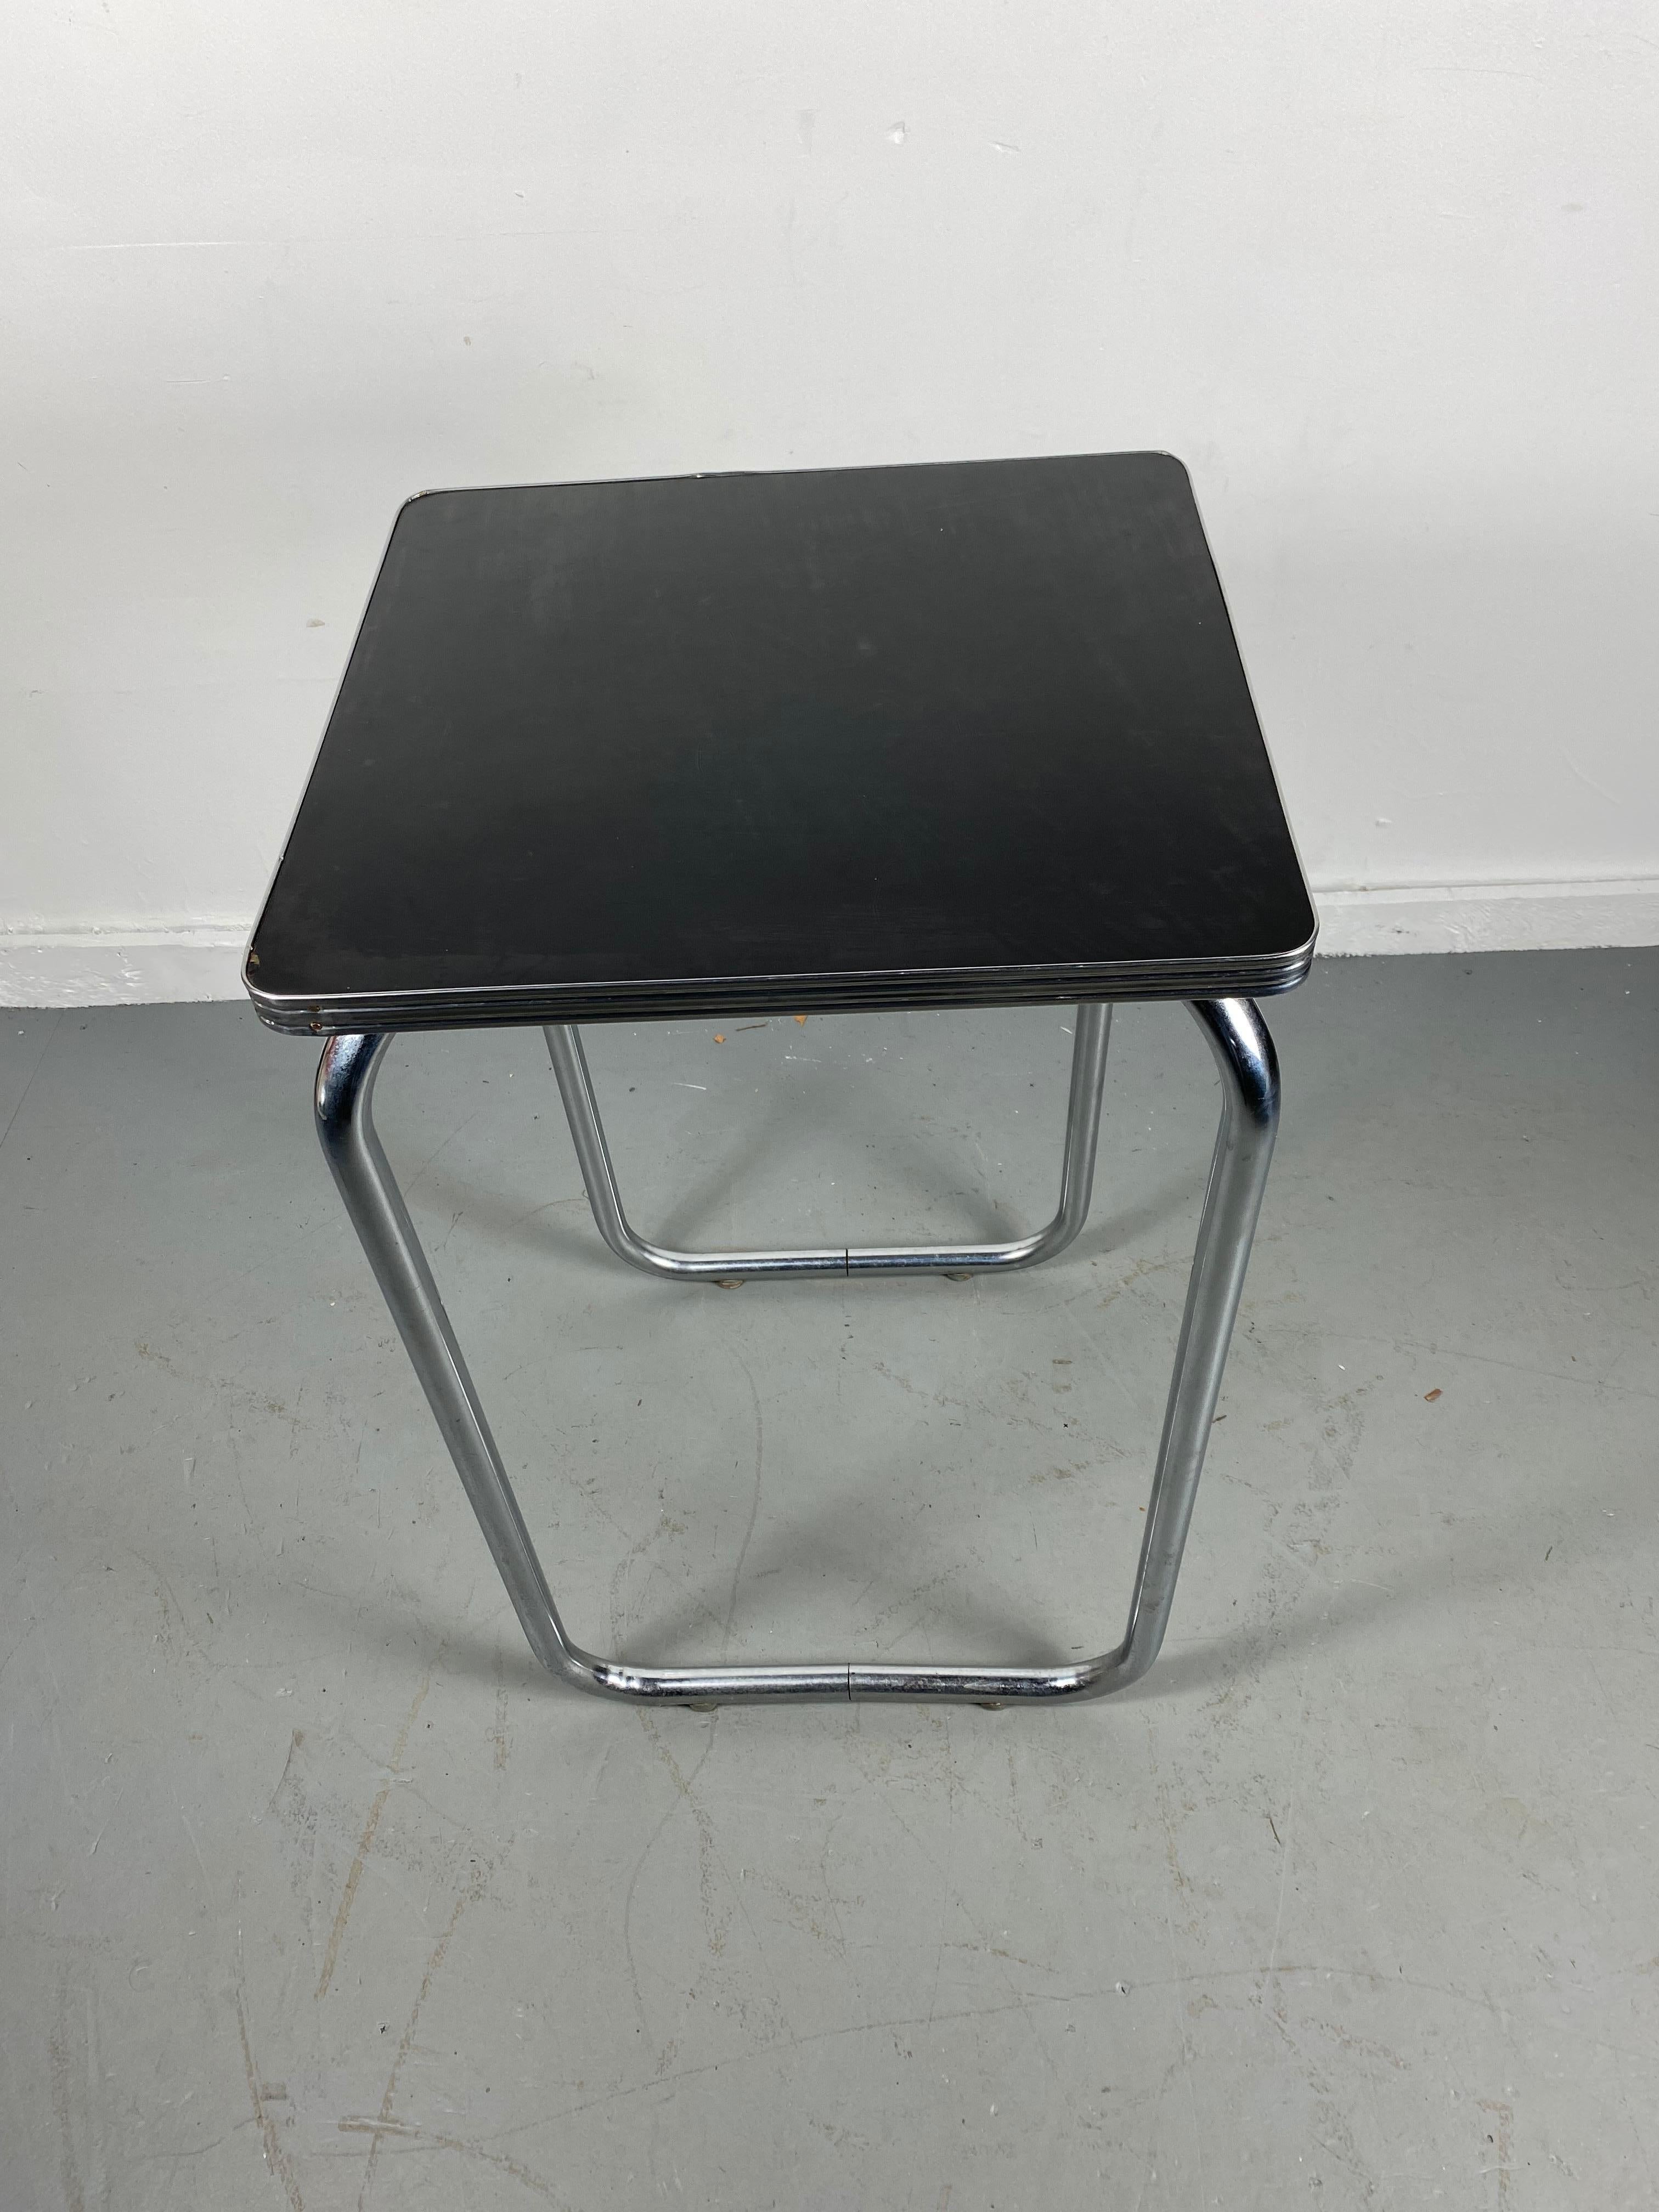 American Unusual Bauhaus Style Black and Tubular Chrome Table / Stand / Wolfgang Hoffmann For Sale